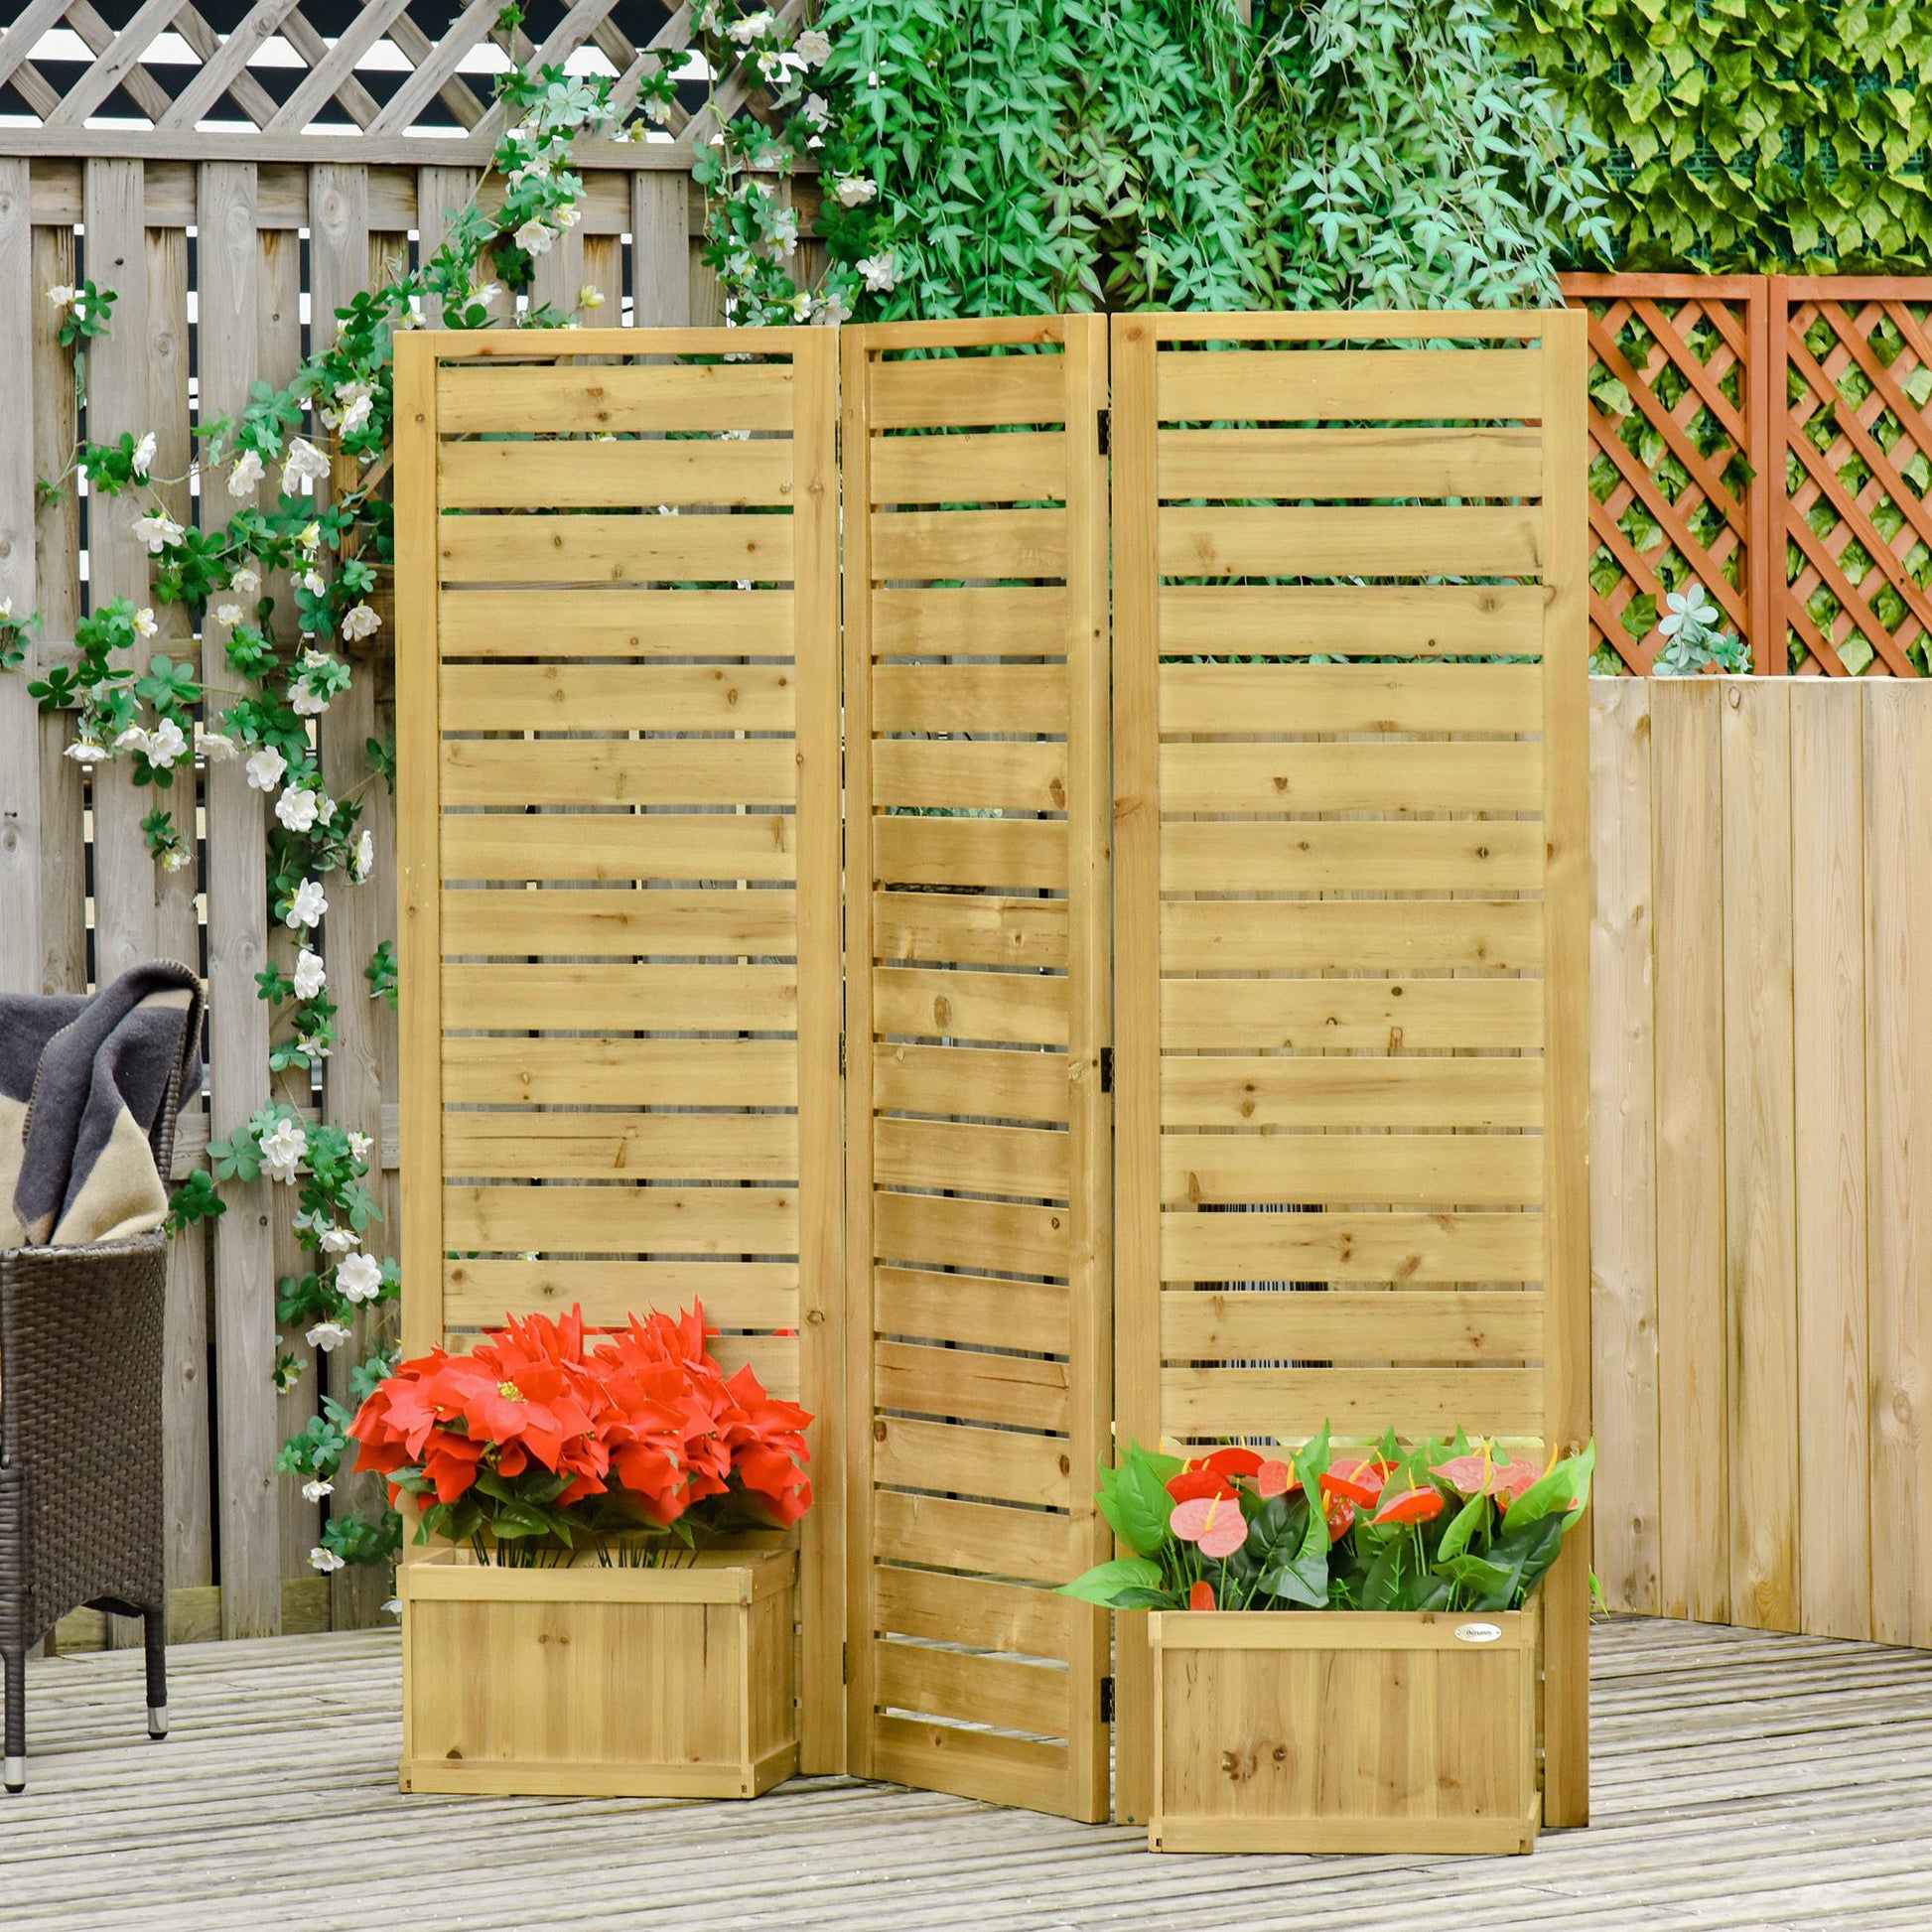 Outdoor Privacy Screen Wood Privacy Panel with 4 Planter Boxes, Raised Bed with 3 Panels, Drainage Holes at Gallery Canada